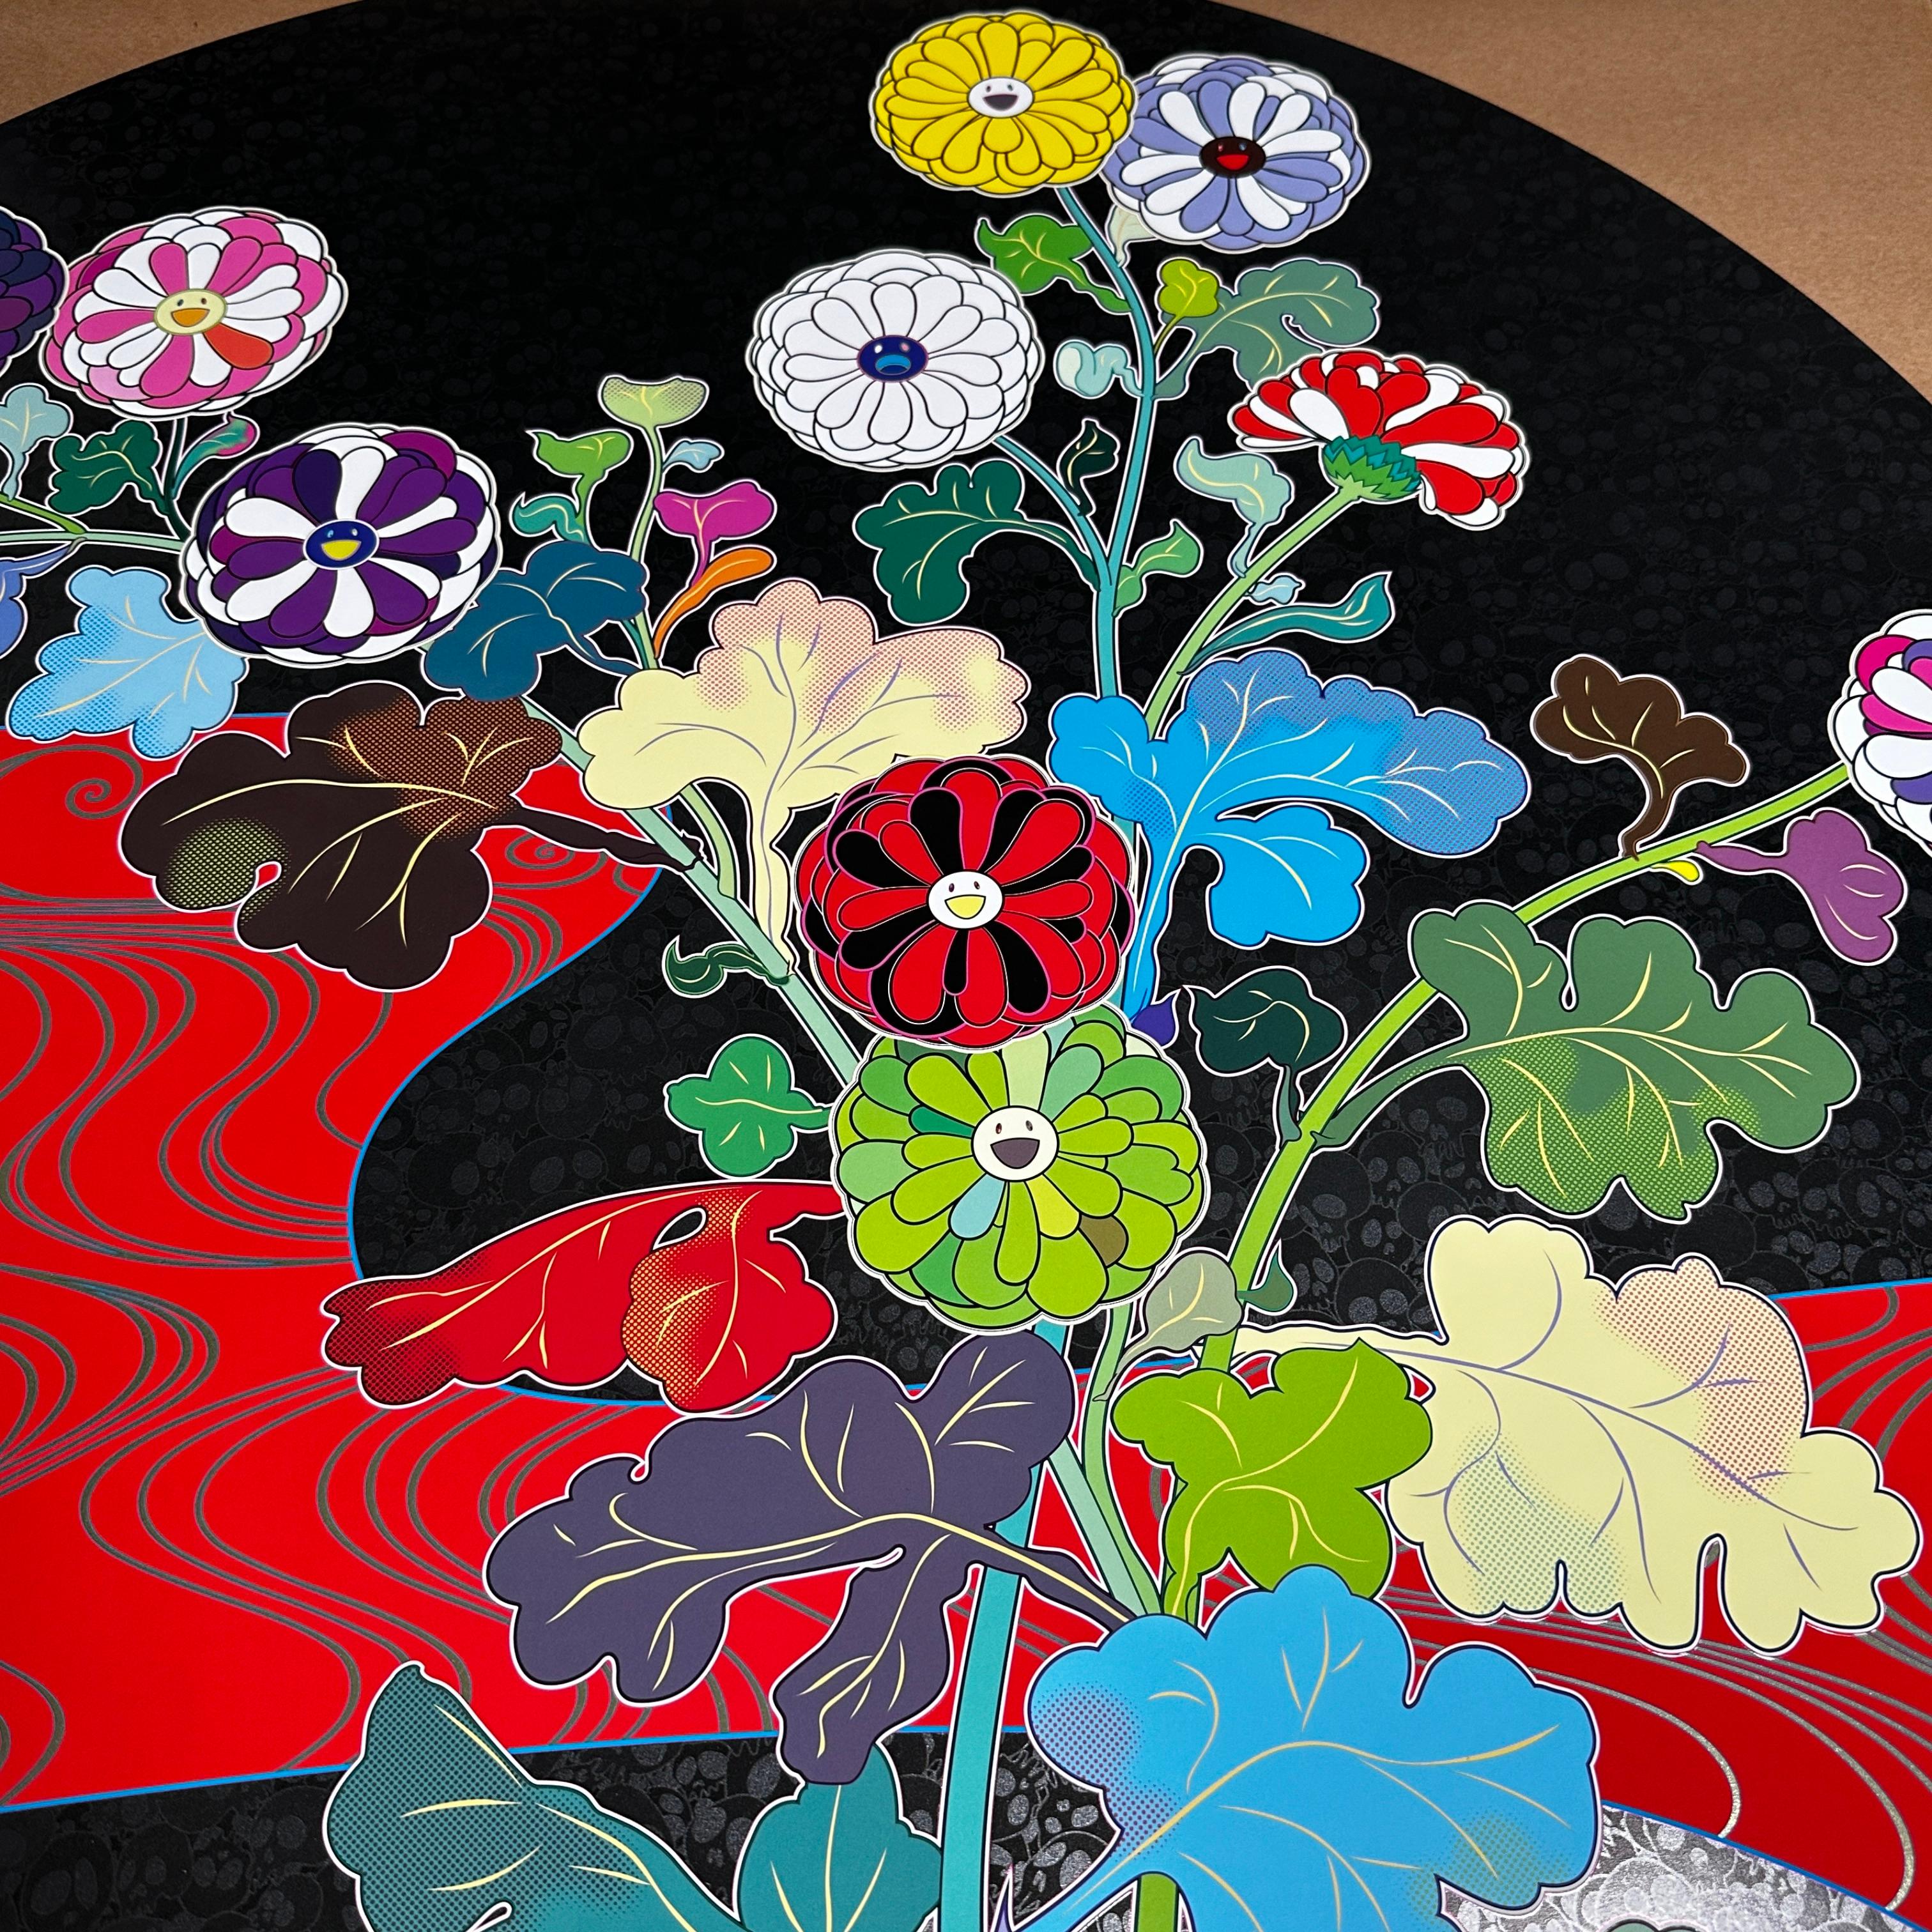 Flowers Blooming in the Isle of the Dead (Takashi Murakami, Tokyo, Flowers) 4